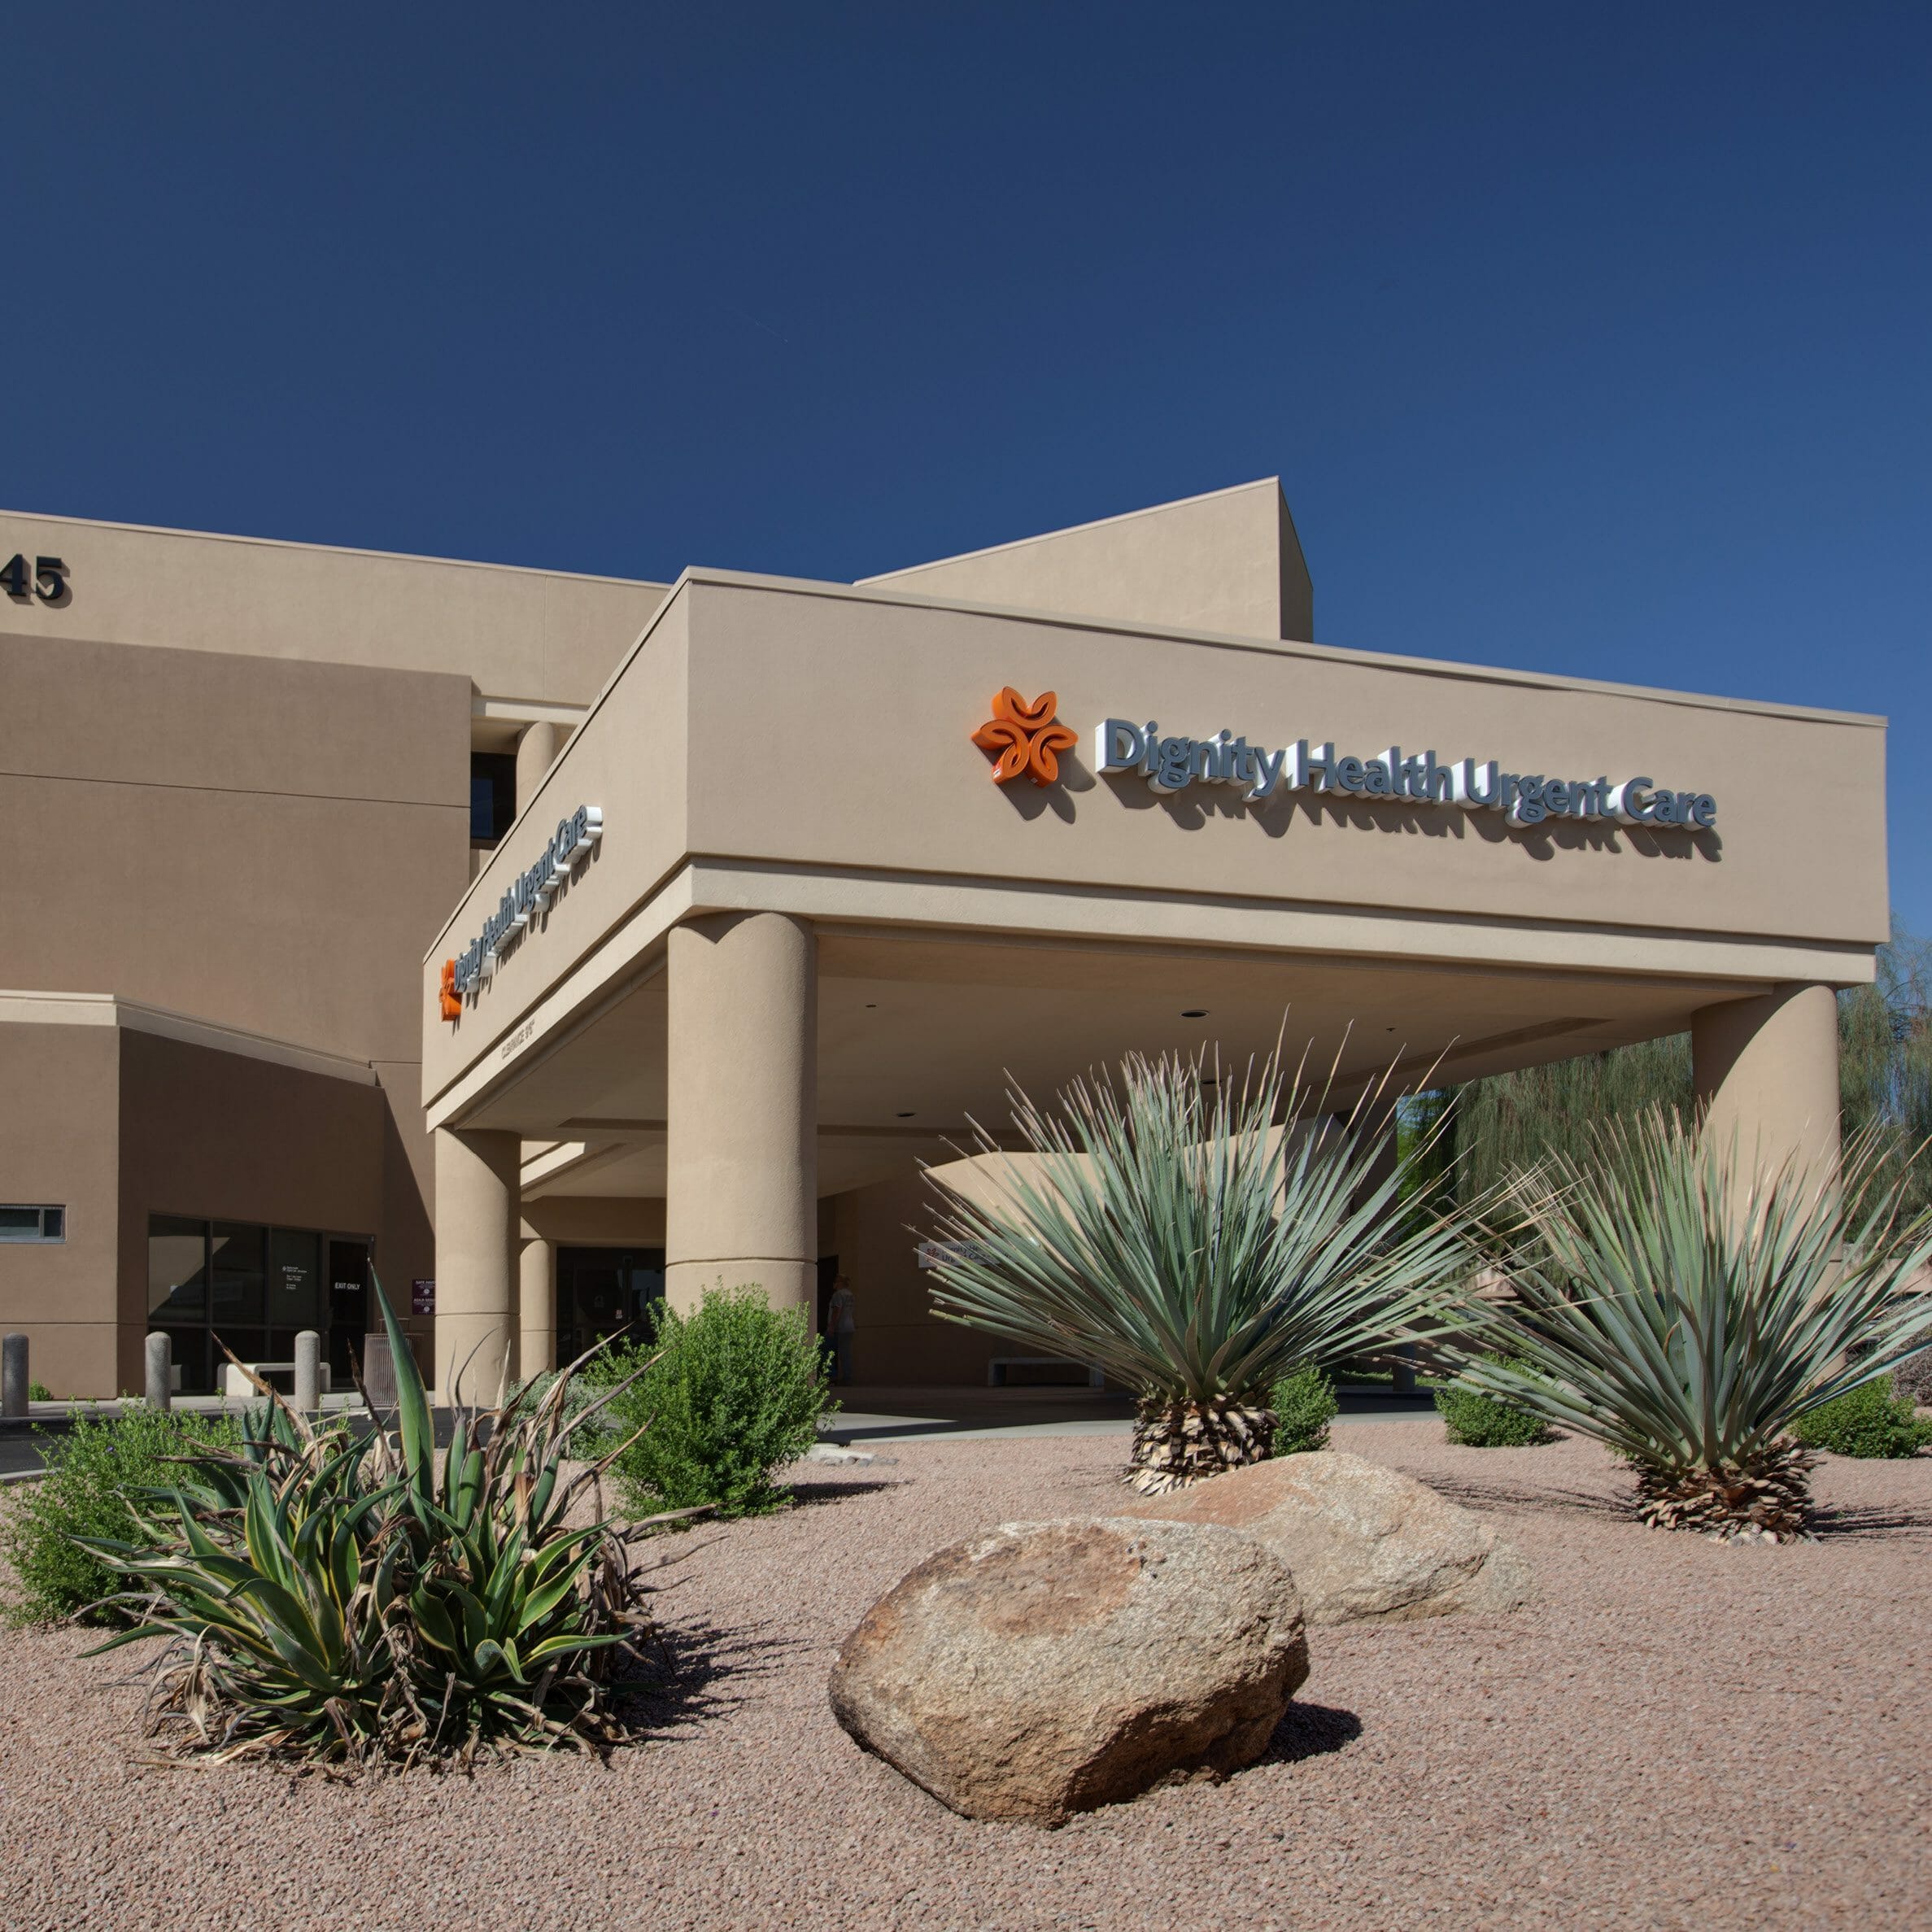 The front of the Dignity Health Urgent Care with a tan, stucco exterior and stucco porte-cochère with desert-like landscape around the building